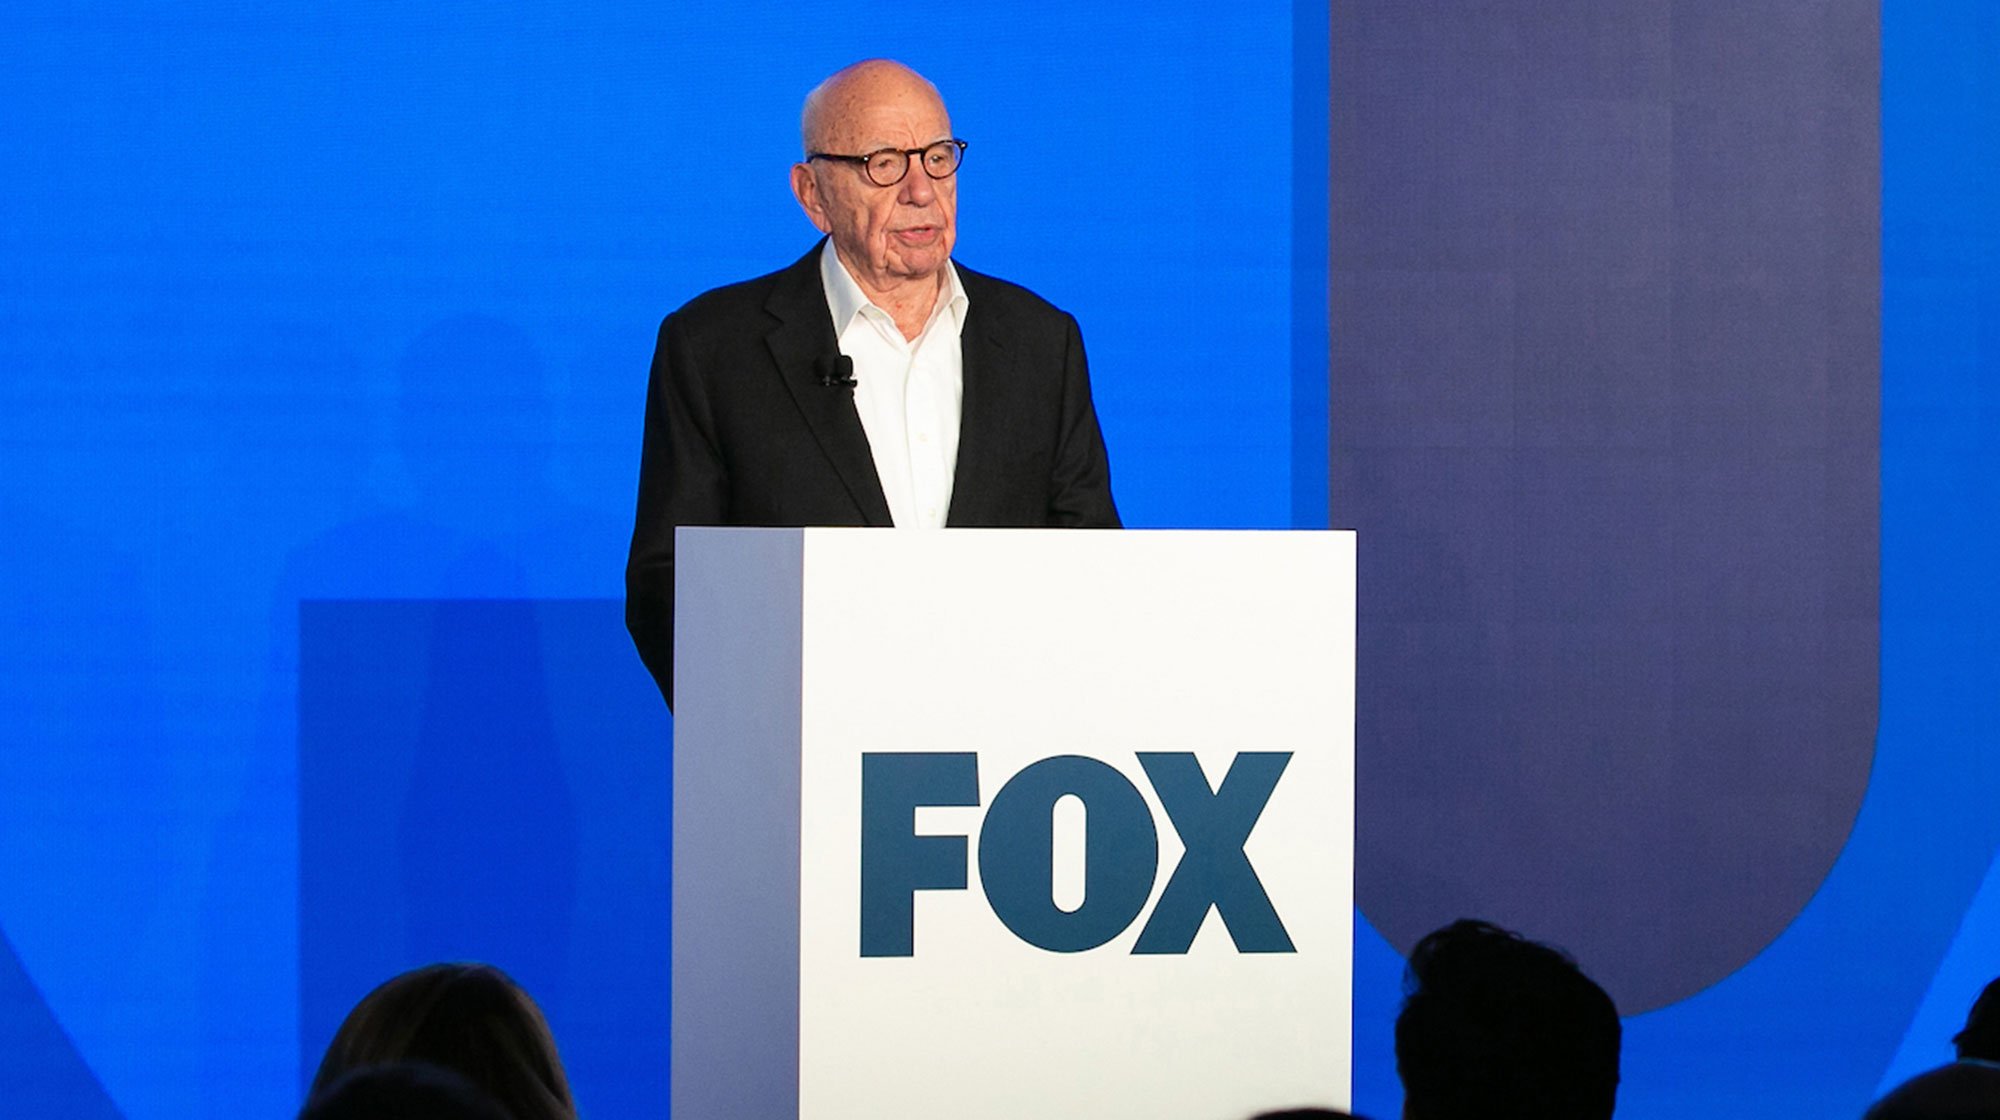 Rupert Murdoch to Receive Over $142 Million in Pension Benefits